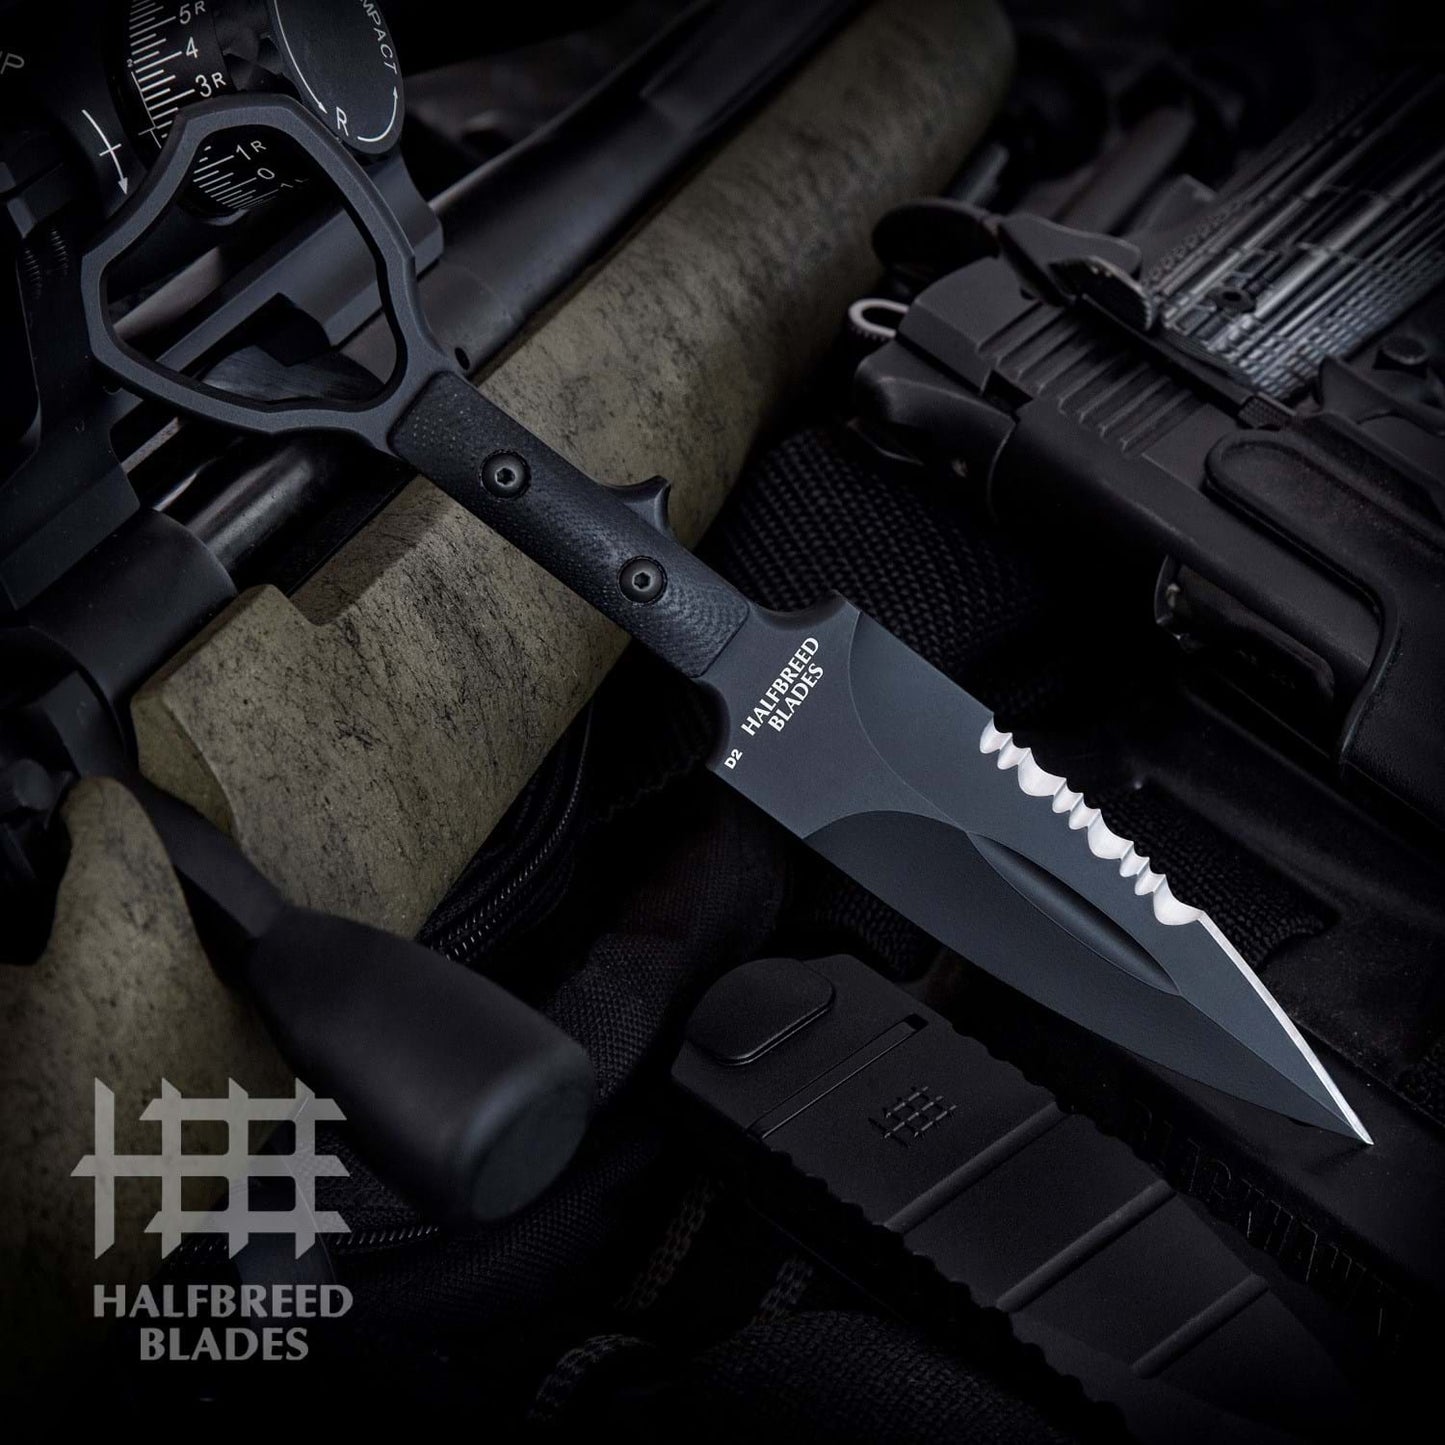 Halfbreed Blades CCK-01 Black Compact Clearance Knife K110/D2